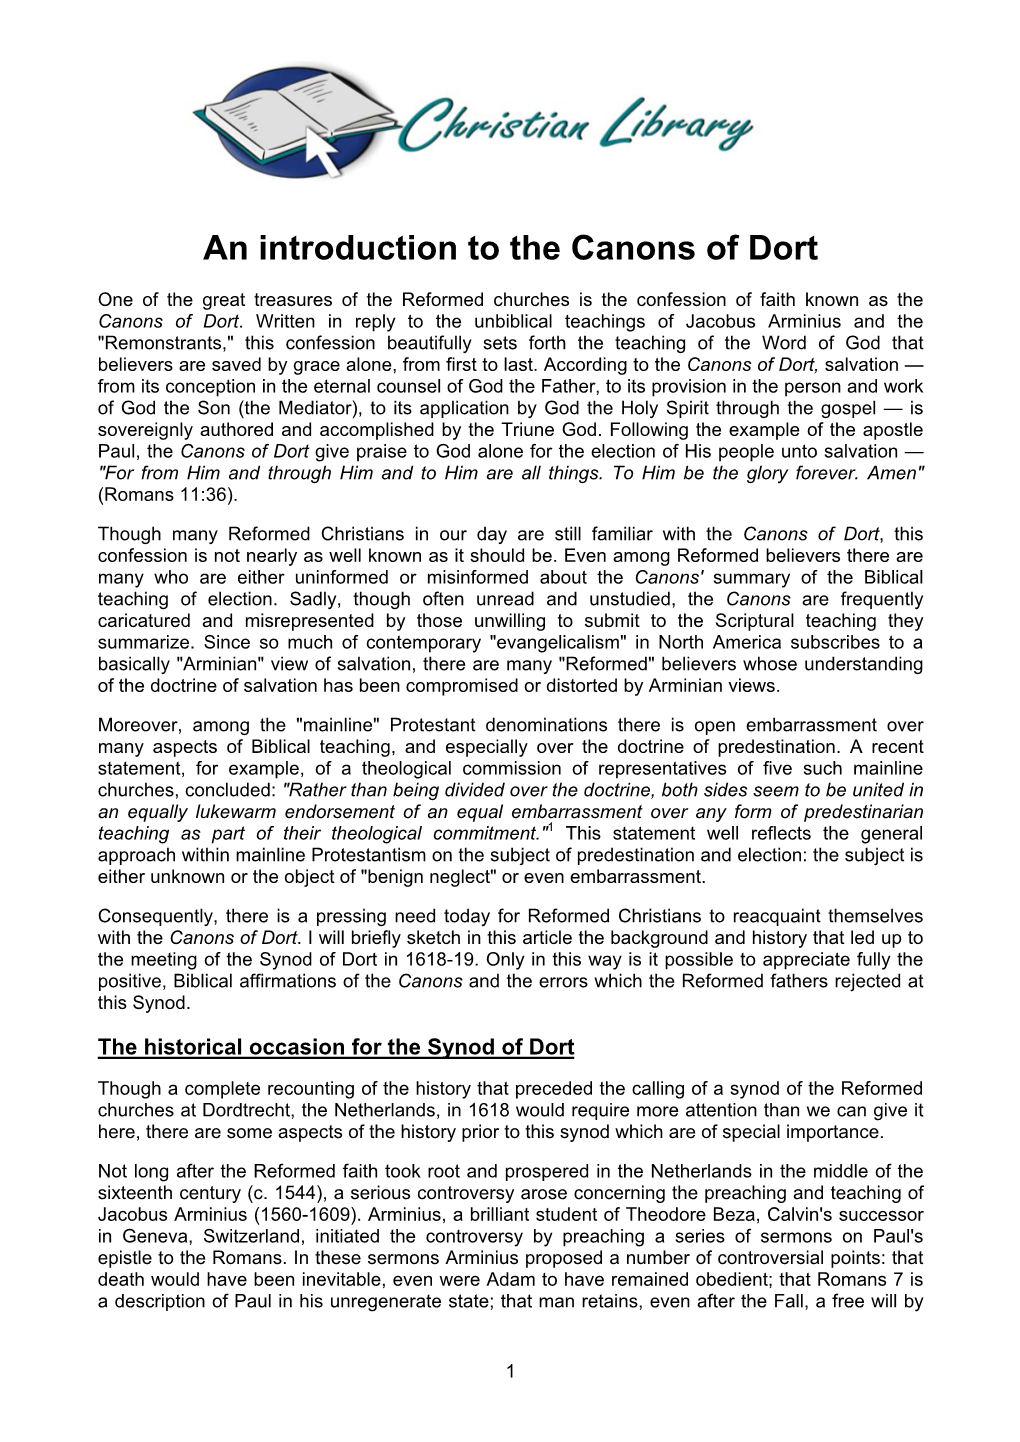 An Introduction to the Canons of Dort